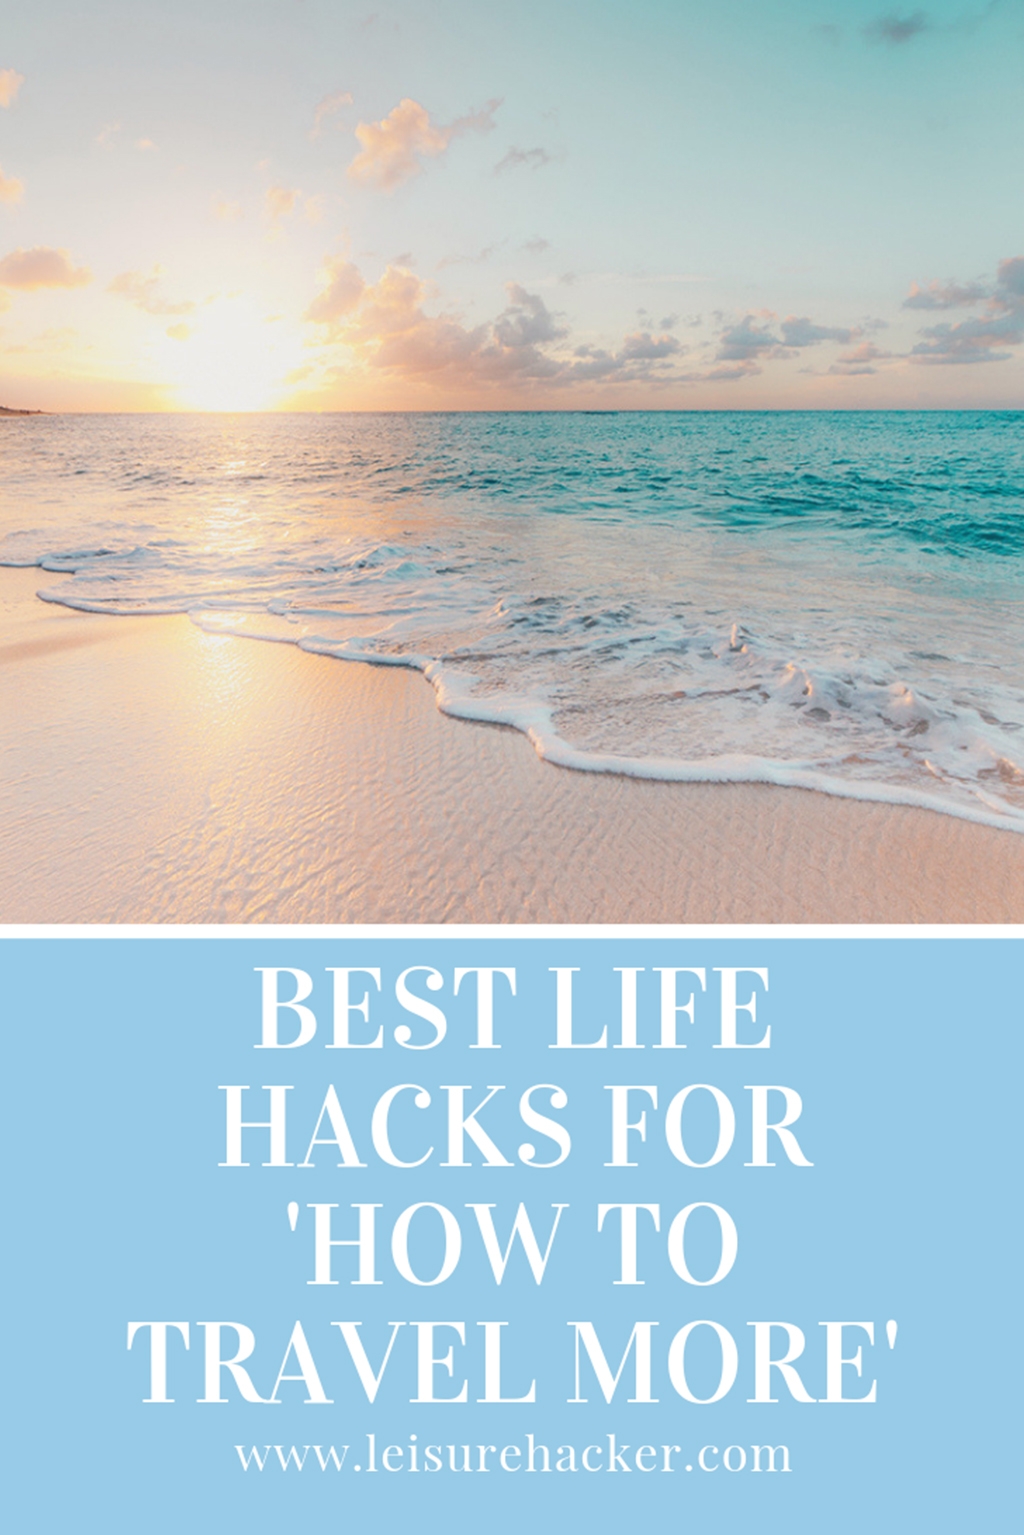 Best life hacks for how to travel more